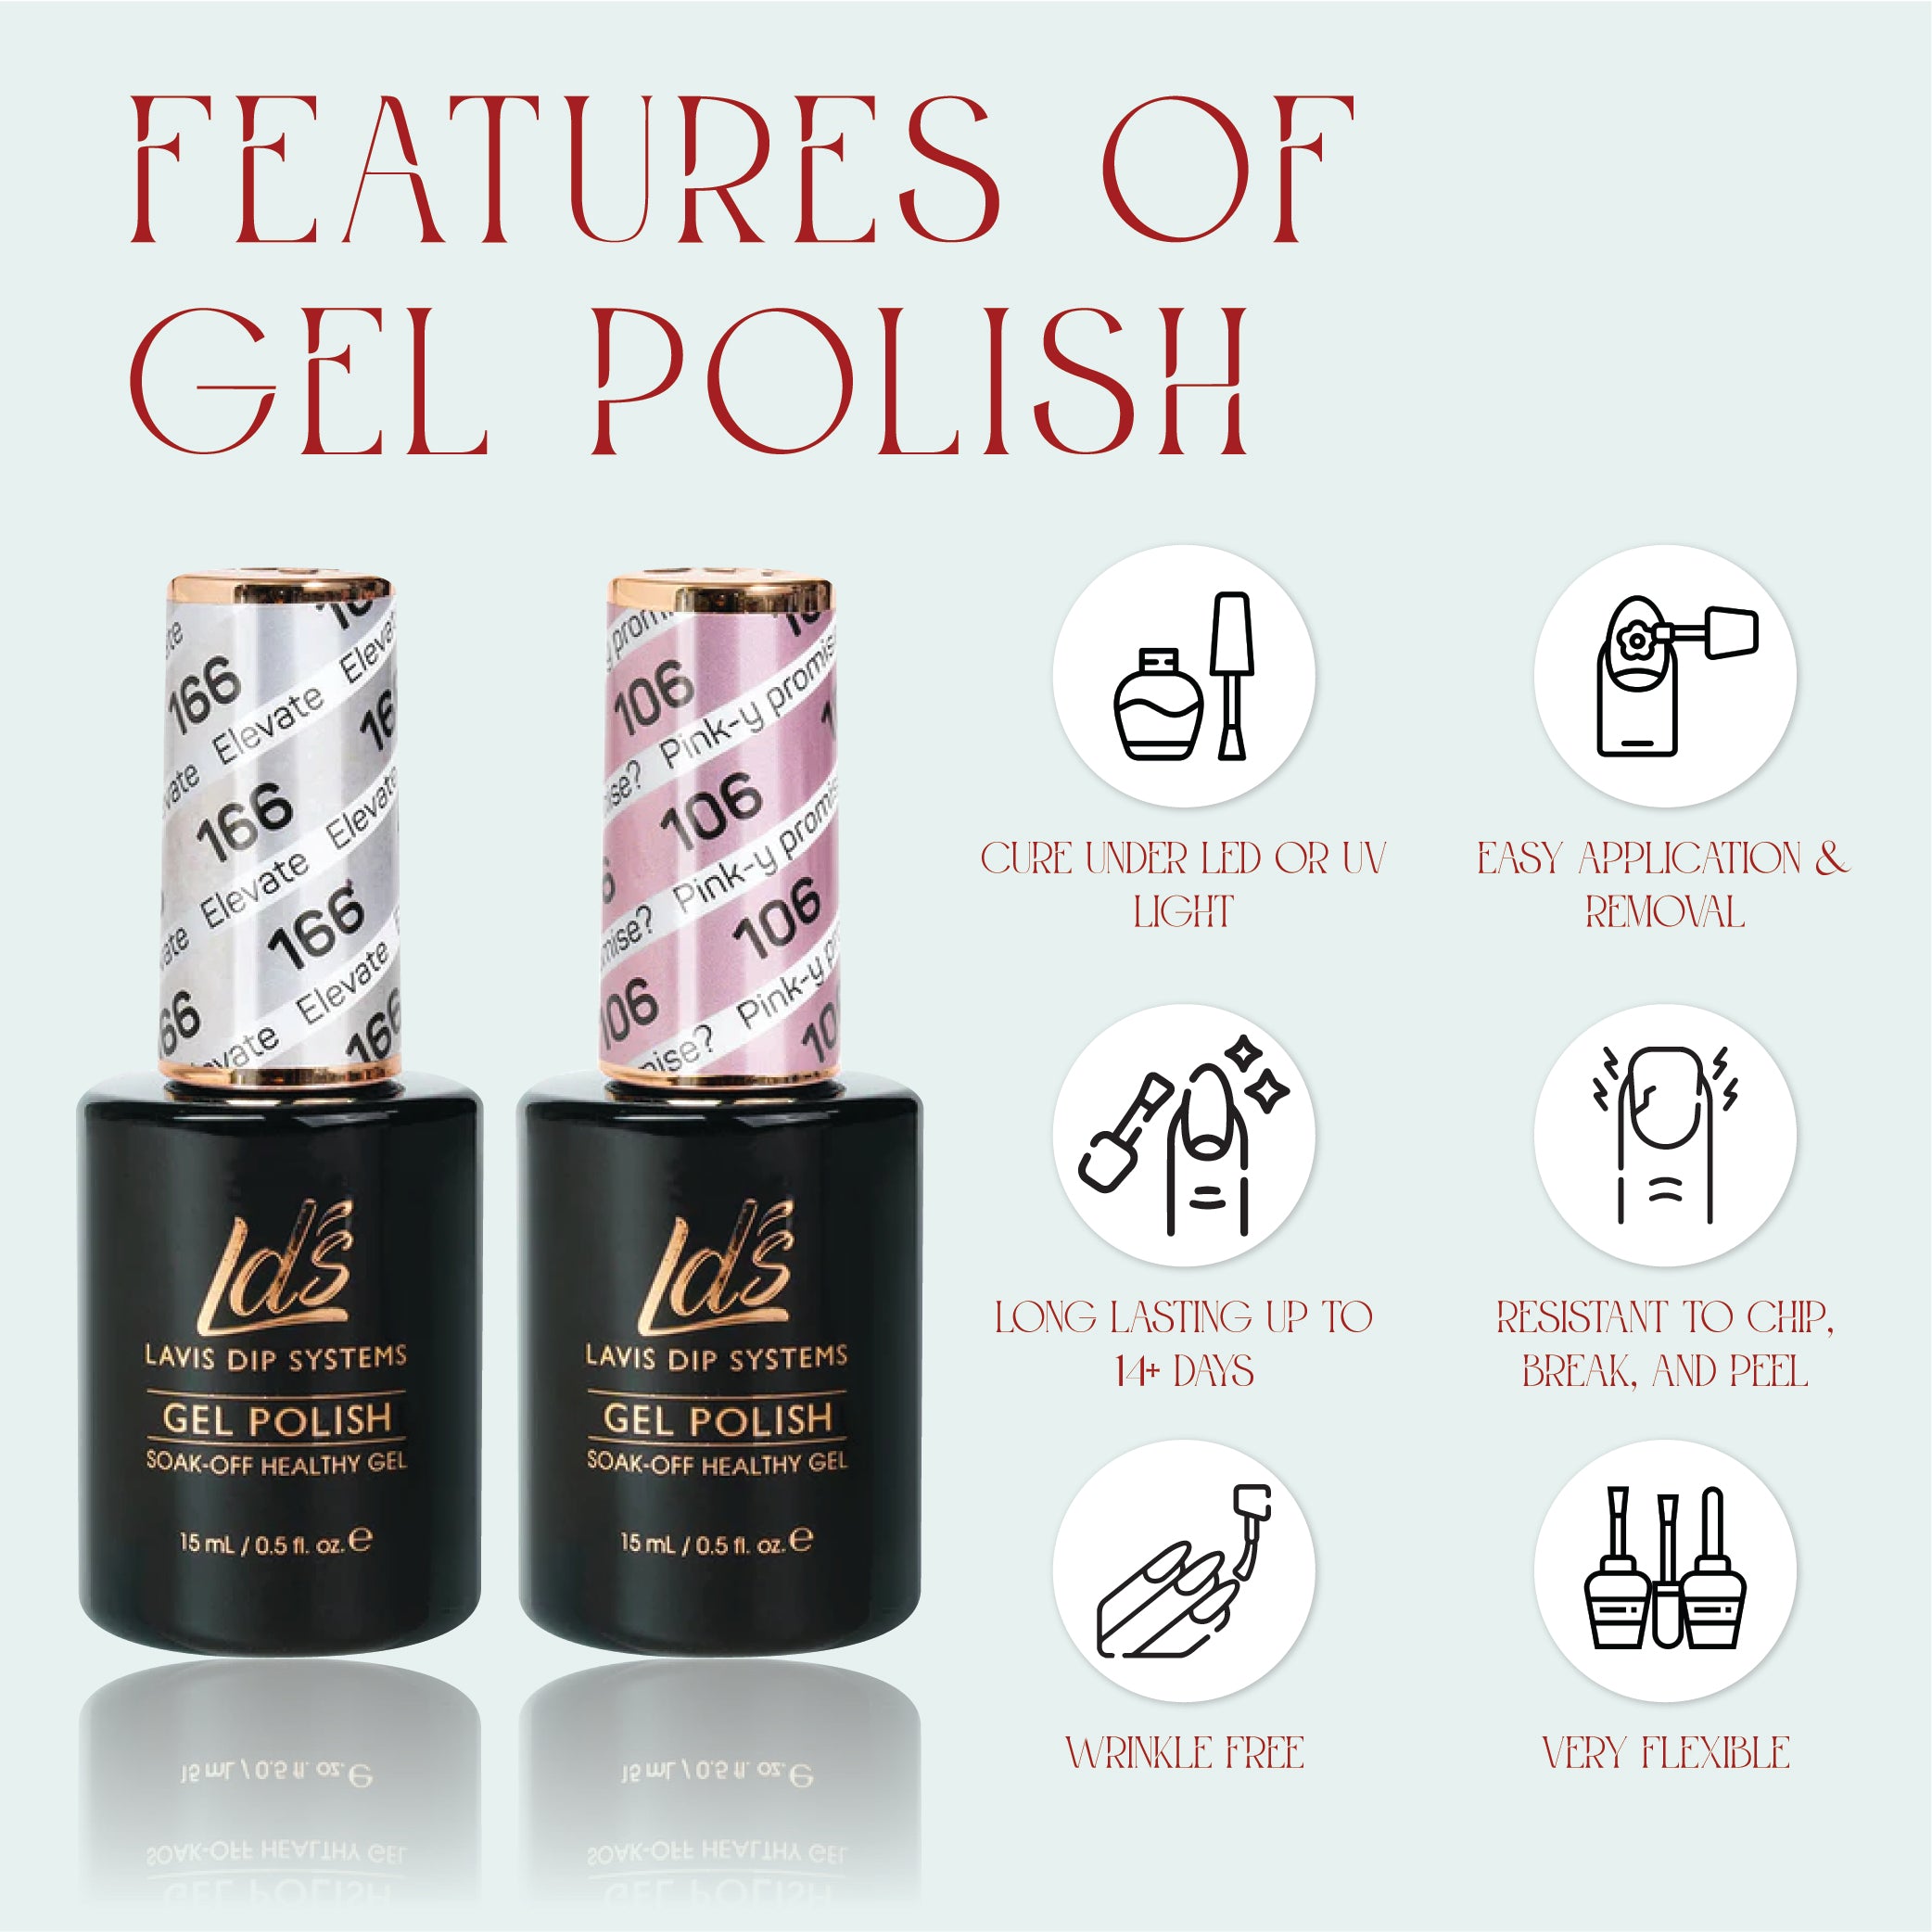 LDS 058 Camellia Pink - LDS Healthy Gel Polish & Matching Nail Lacquer Duo Set - 0.5oz